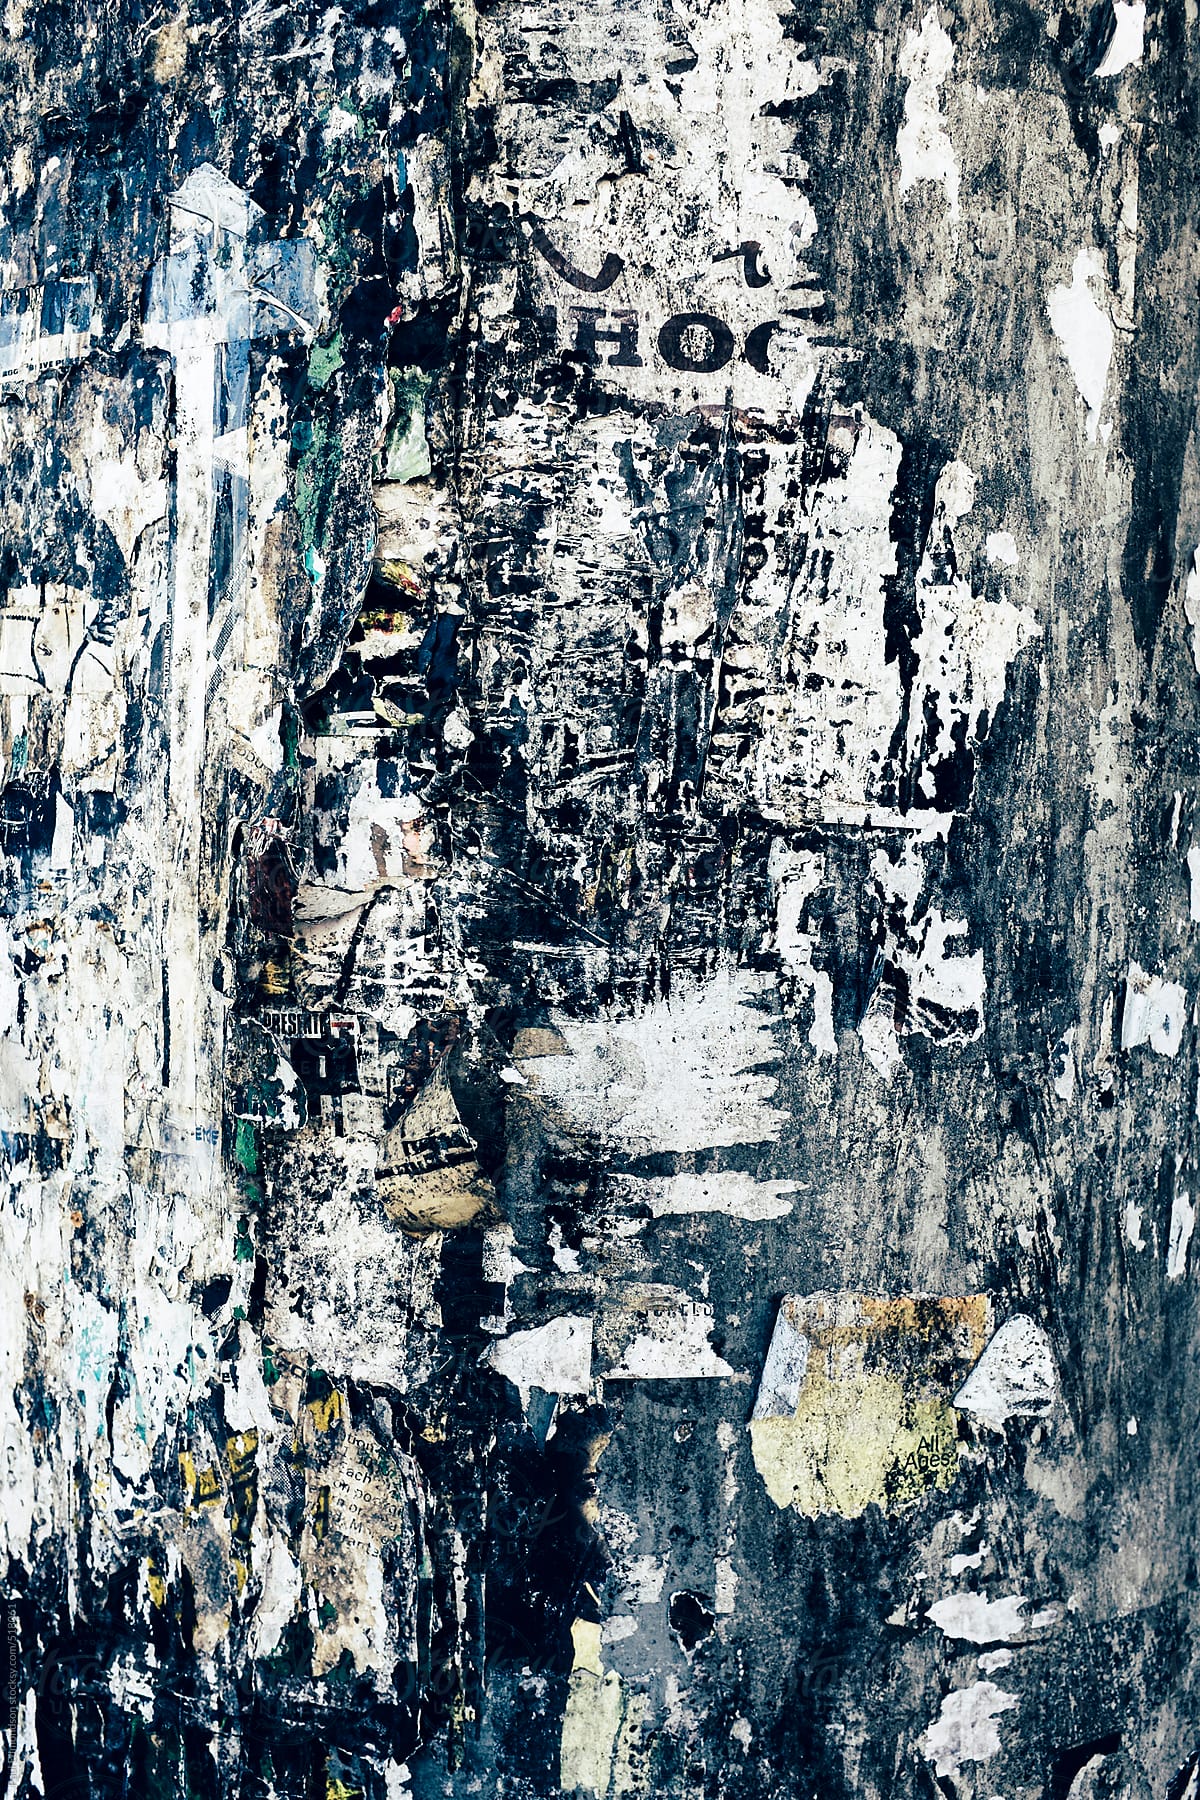 Close up peeling and decaying posters on building wall